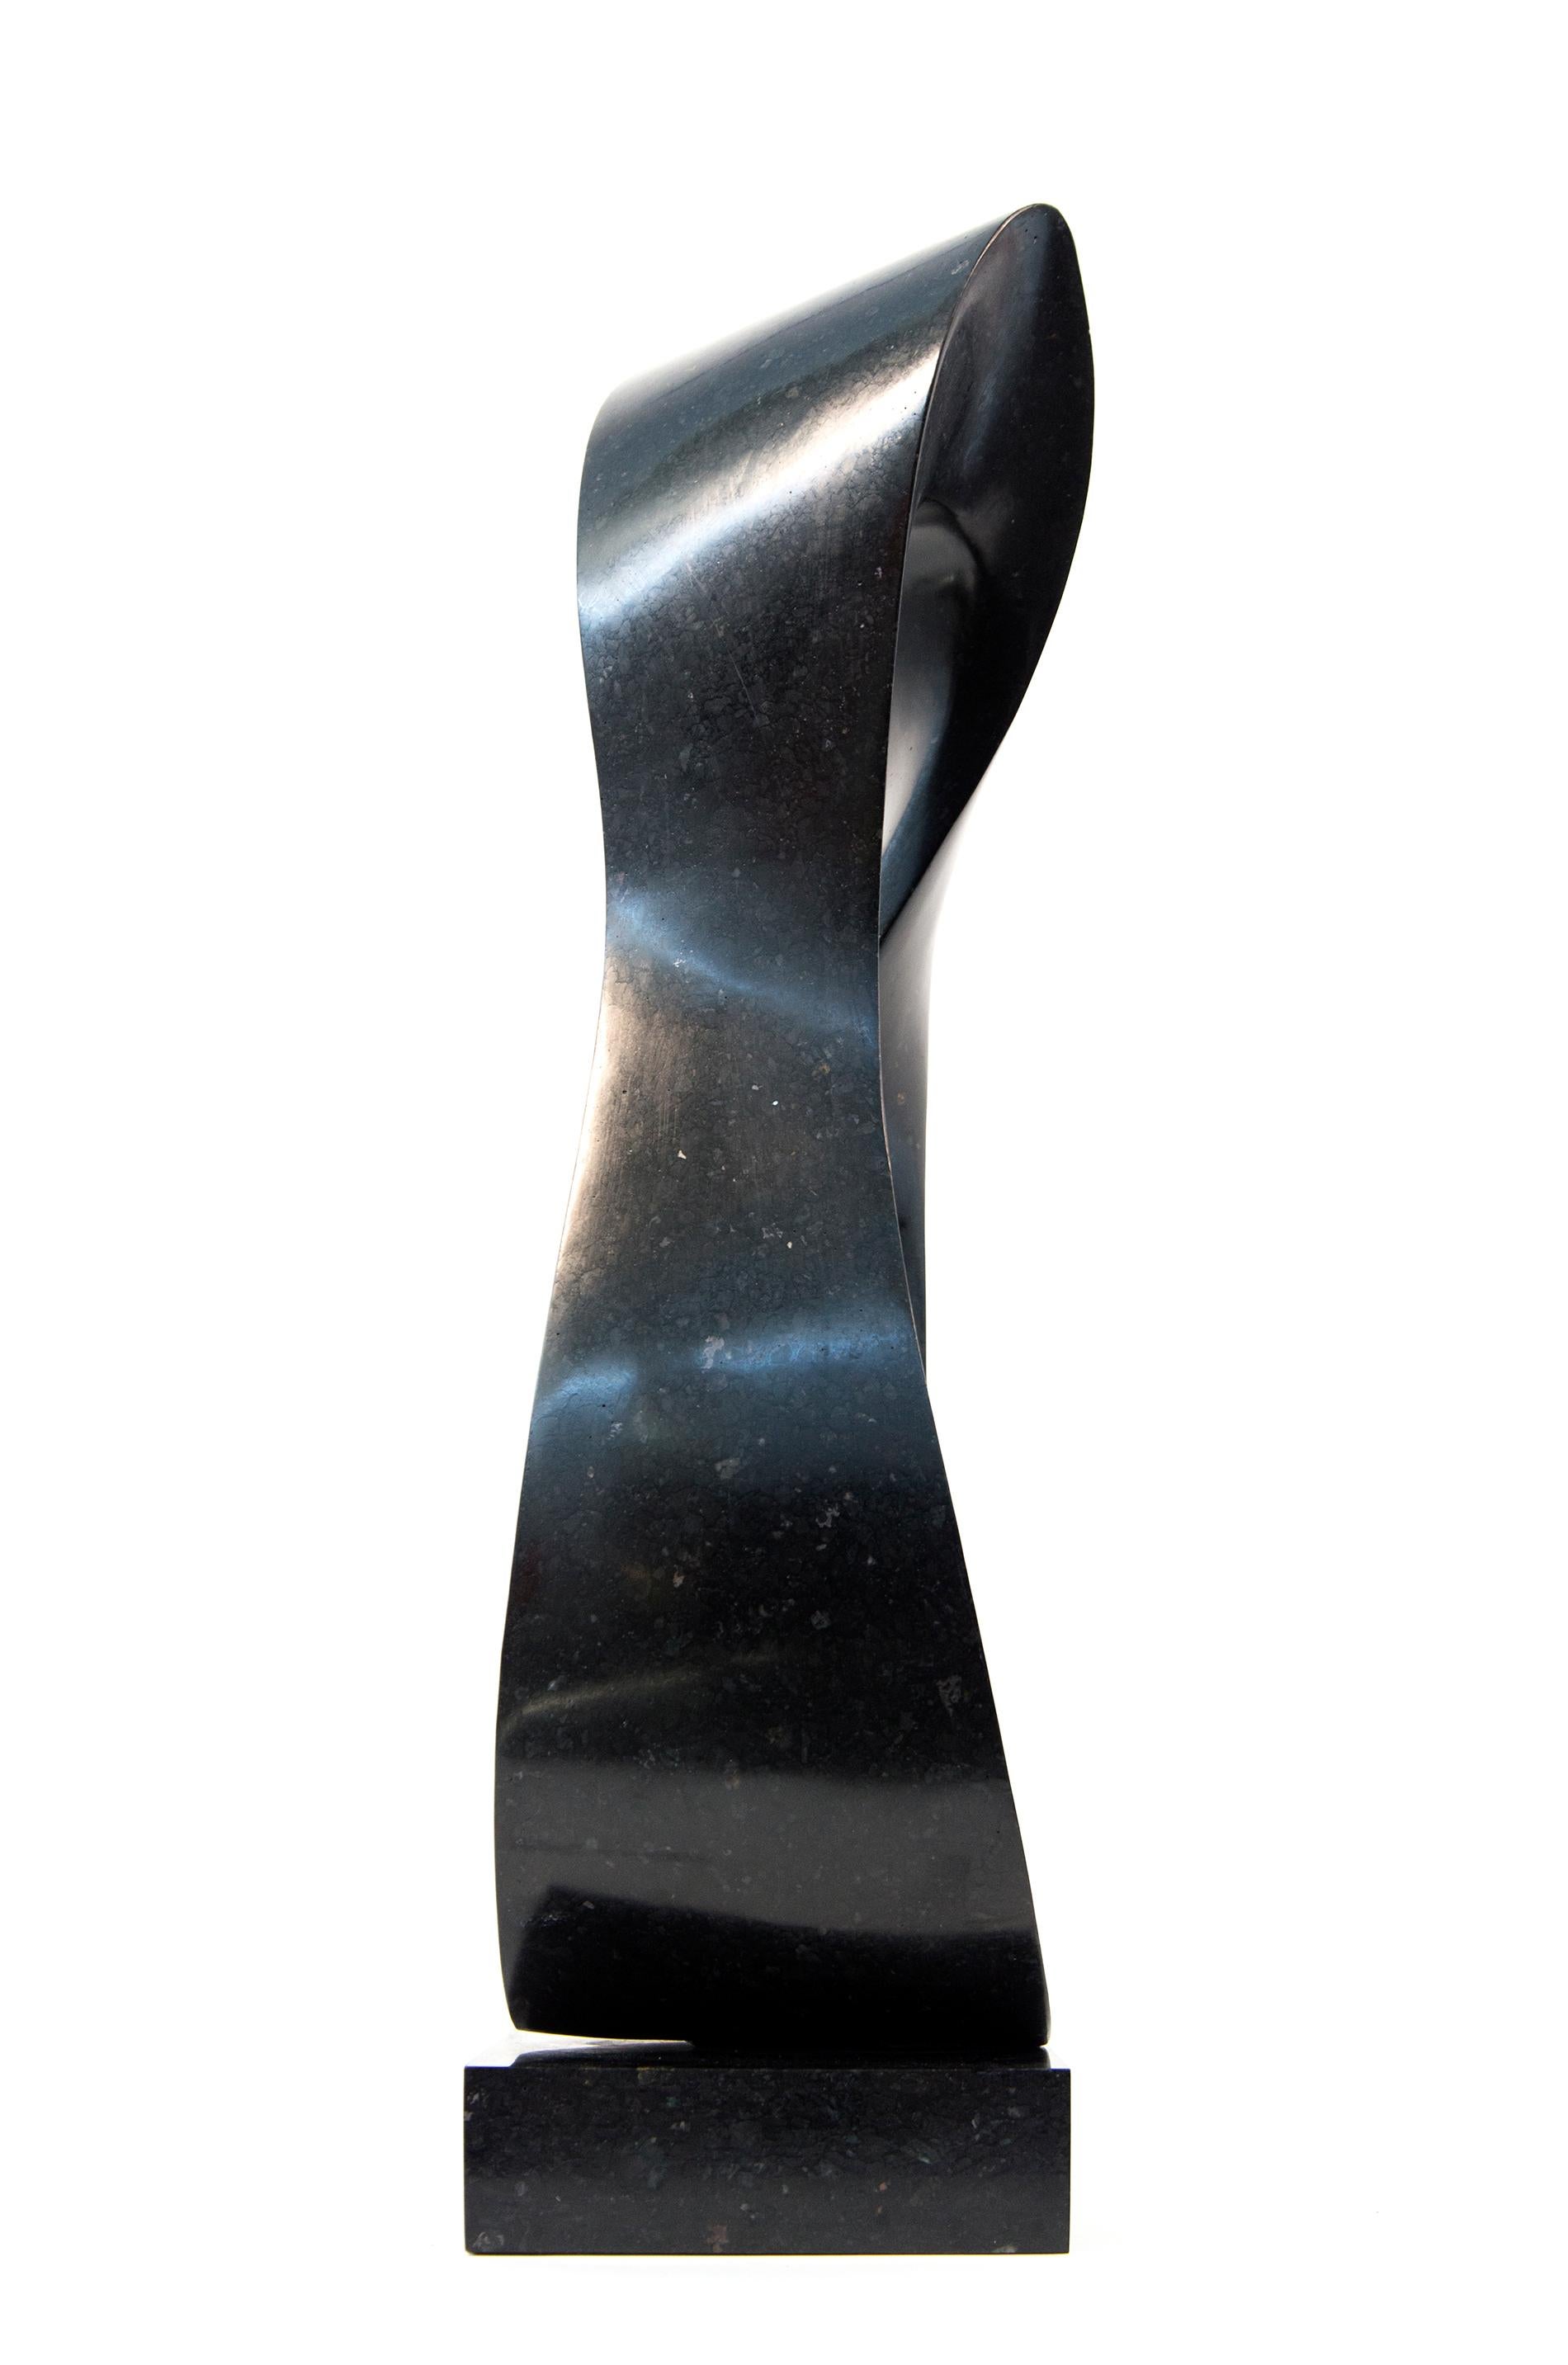 Mobius Minor 1/50 - dark, smooth, polished, abstract, black granite sculpture For Sale 6